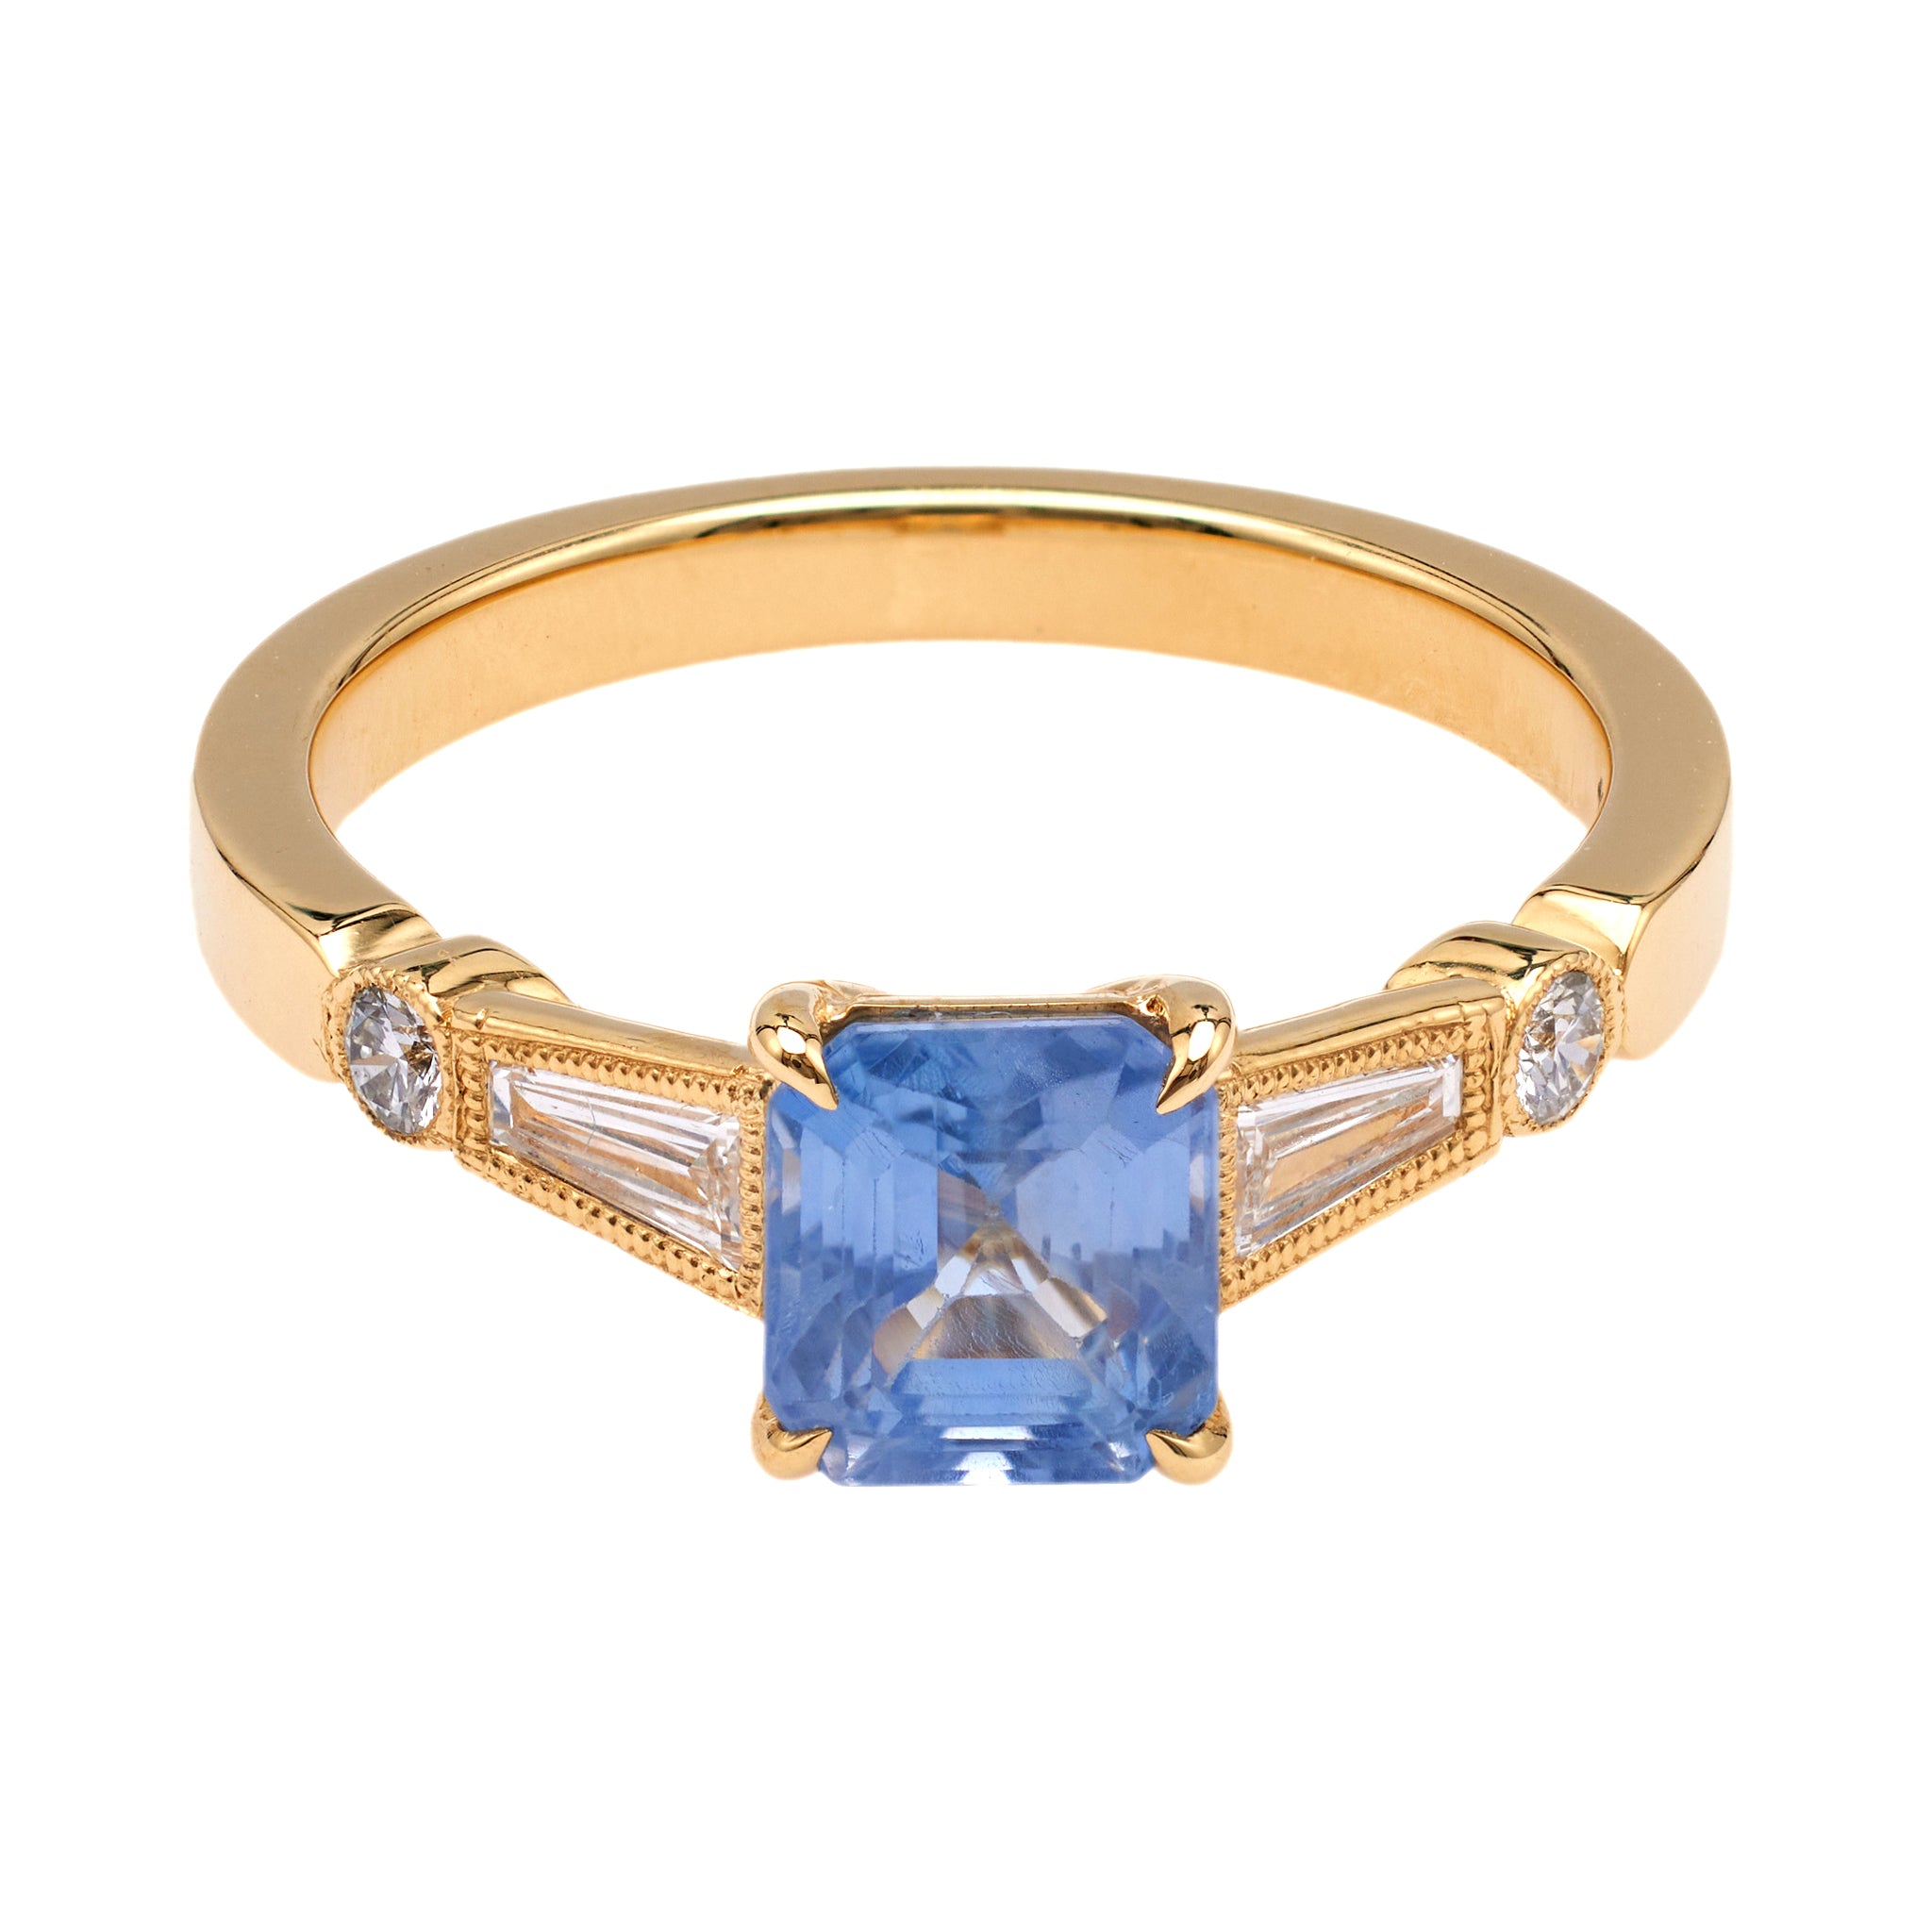 1.70 Carat Sapphire and Diamond 18k Yellow Gold Ring Rings Jack Weir & Sons   